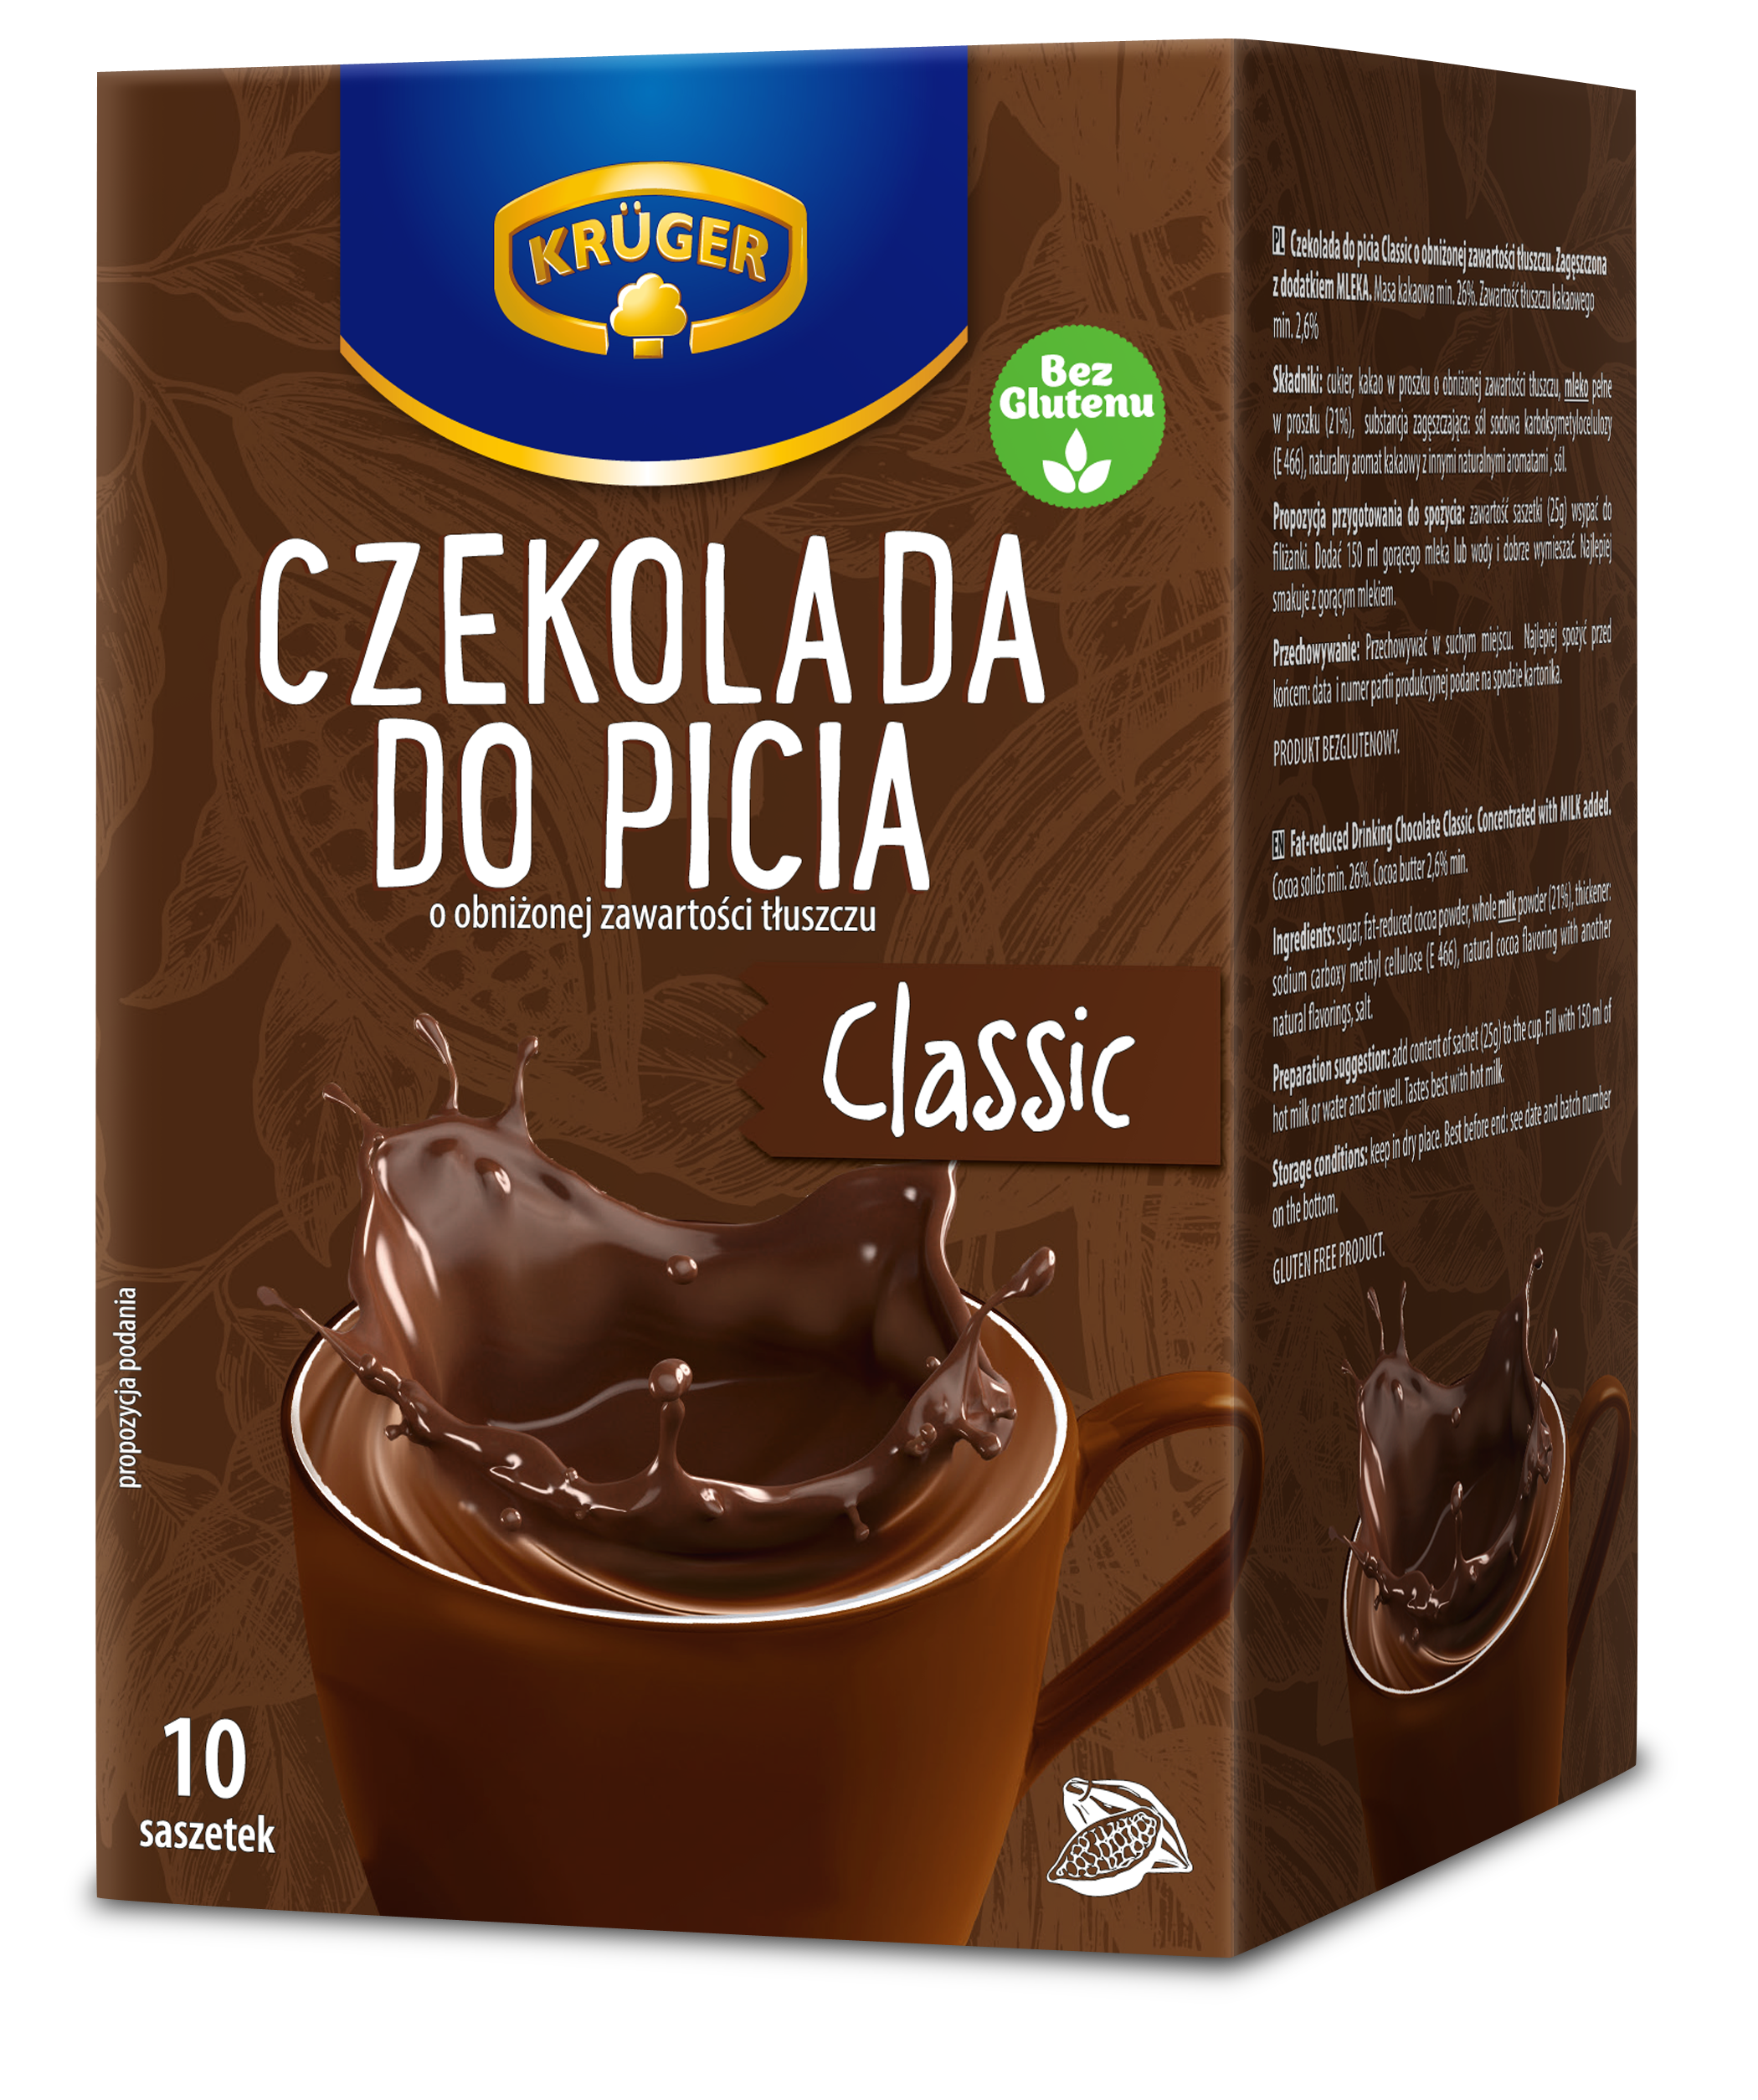 Krüger Classic drinking chocolate with reduced fat content